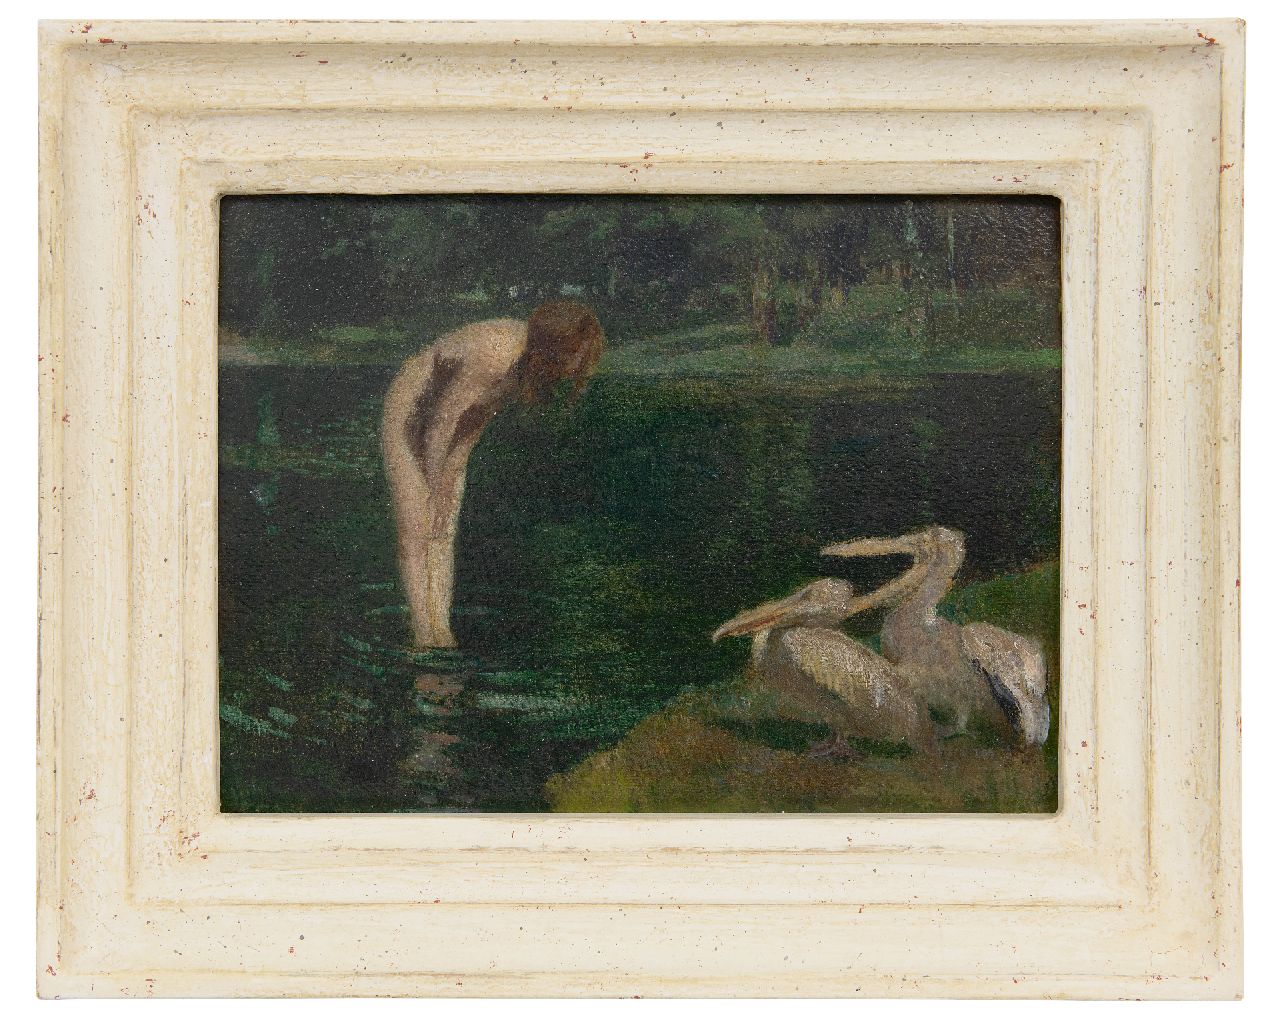 Geffcken W.  | Walter Geffcken | Paintings offered for sale | Encounter on the lakeside, oil on board laid down on panel 20.9 x 28.1 cm, signed l.l.